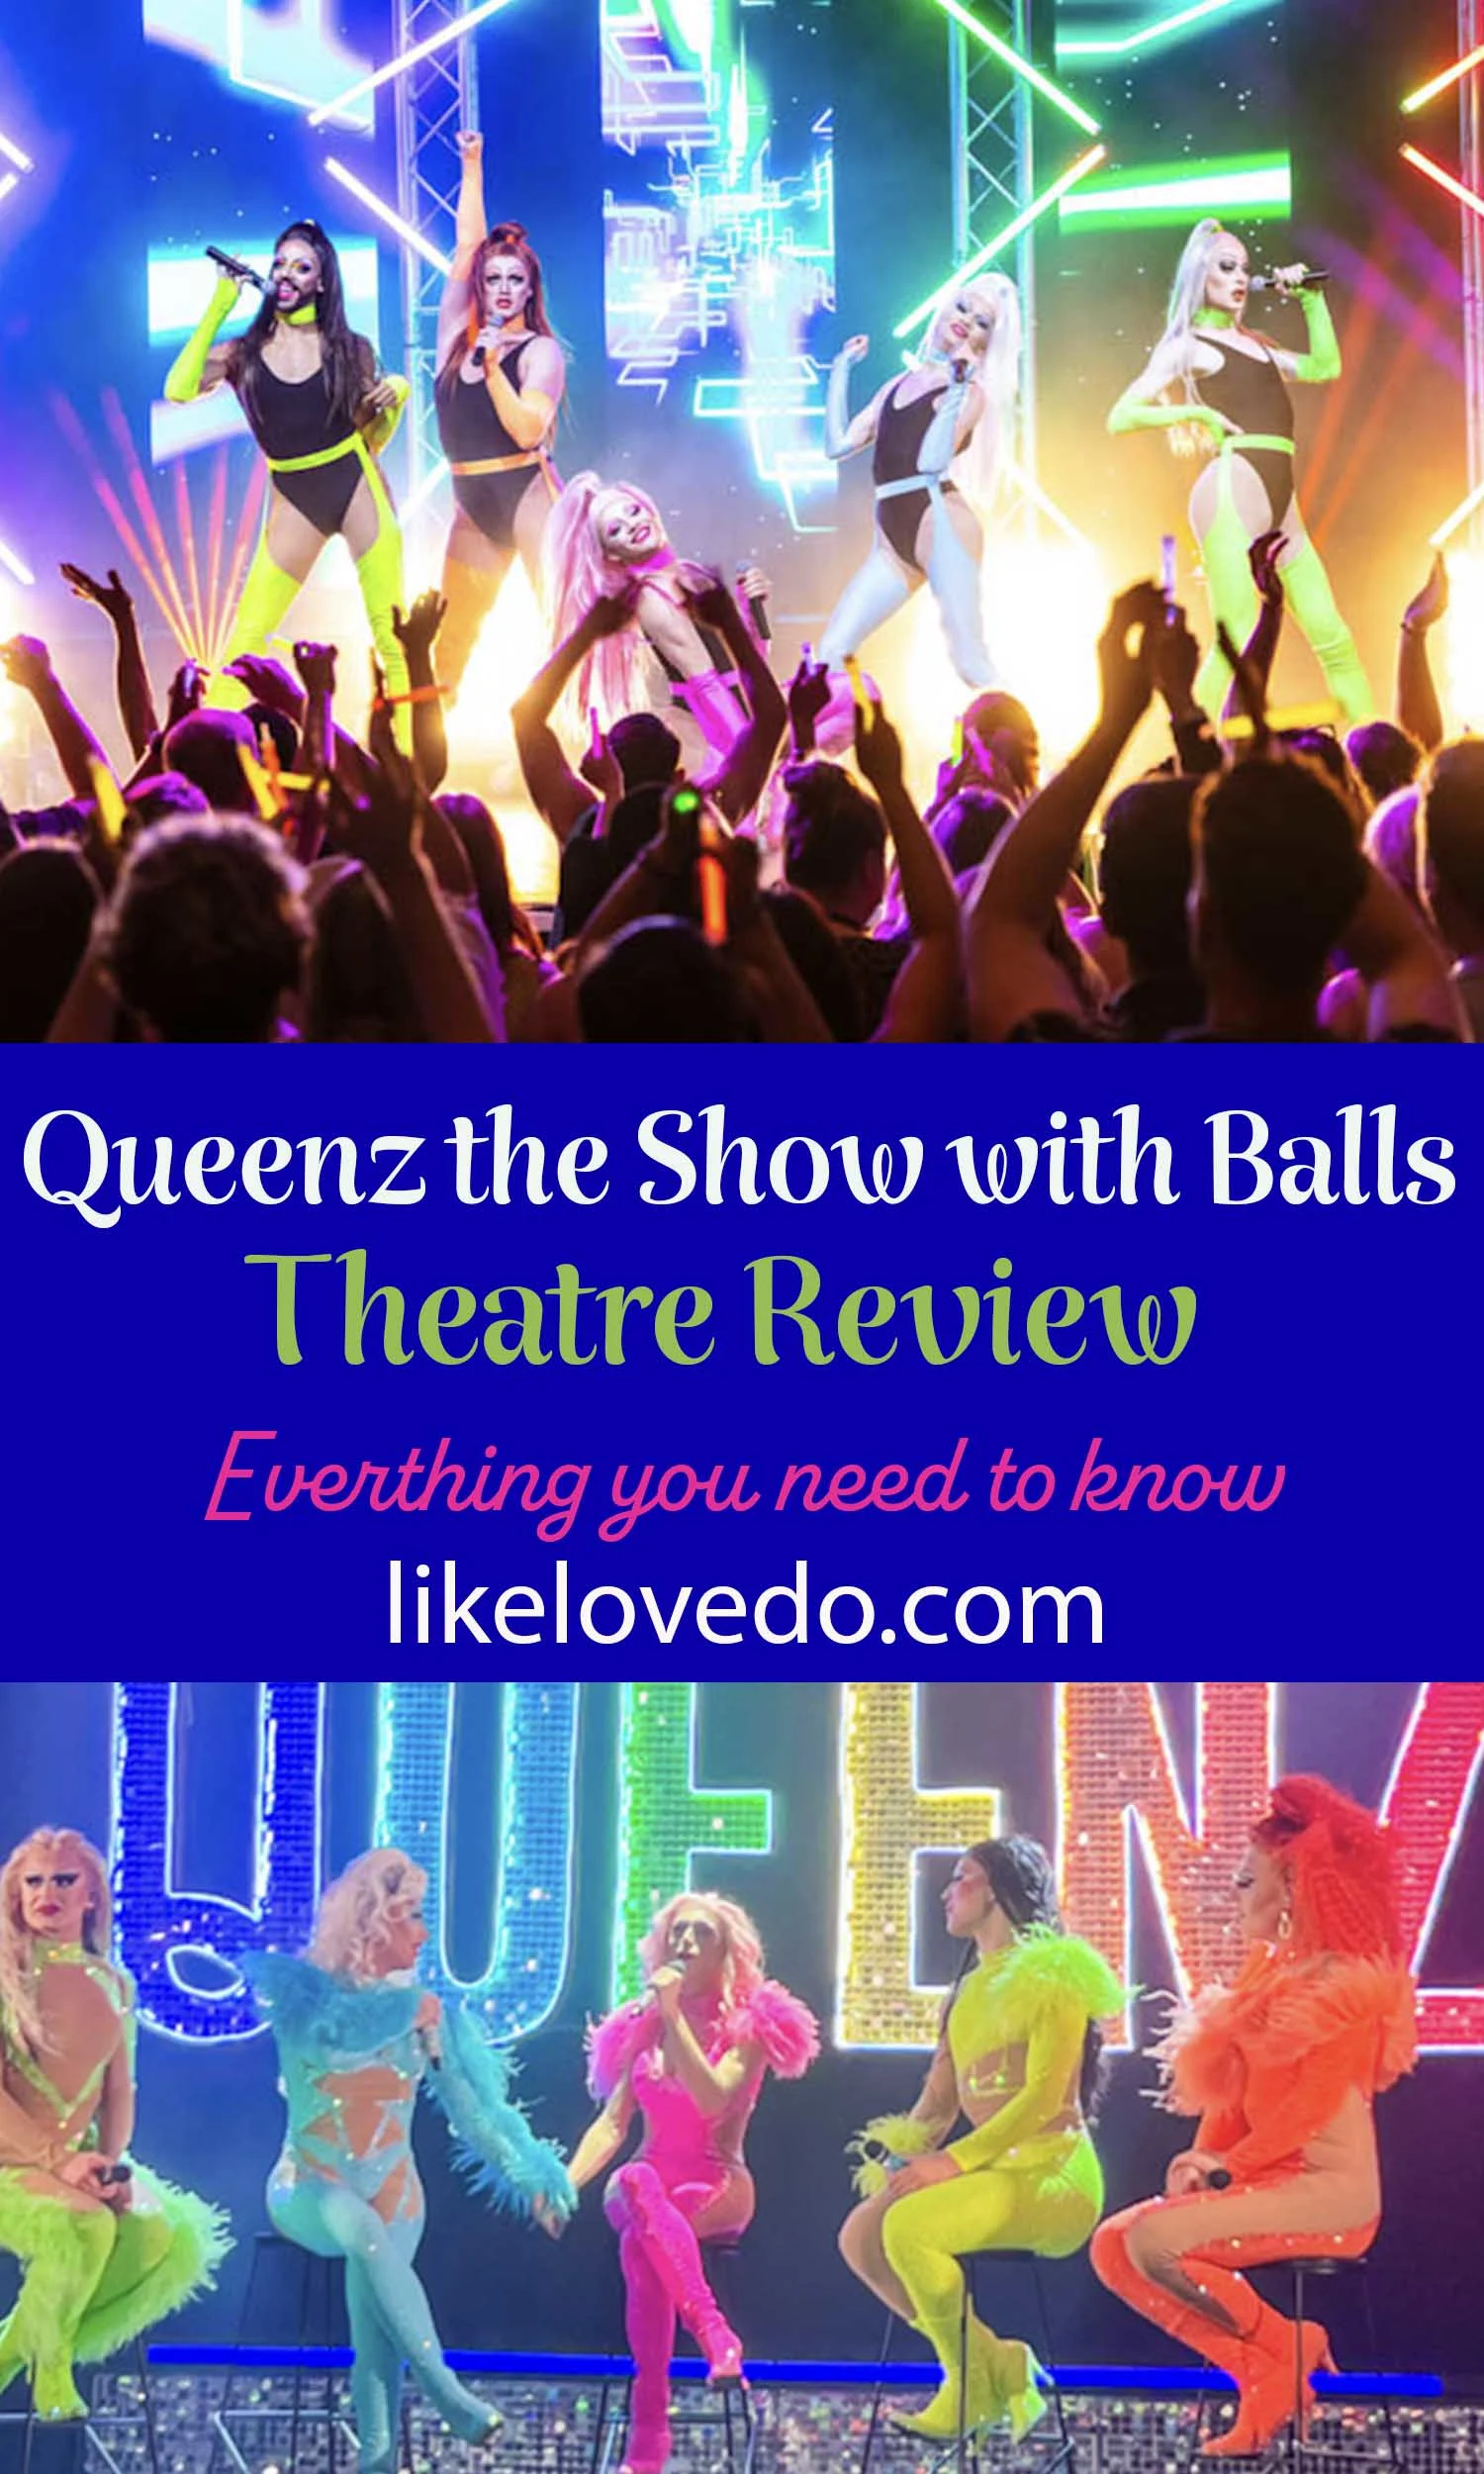 Queenz The Show with Balls!